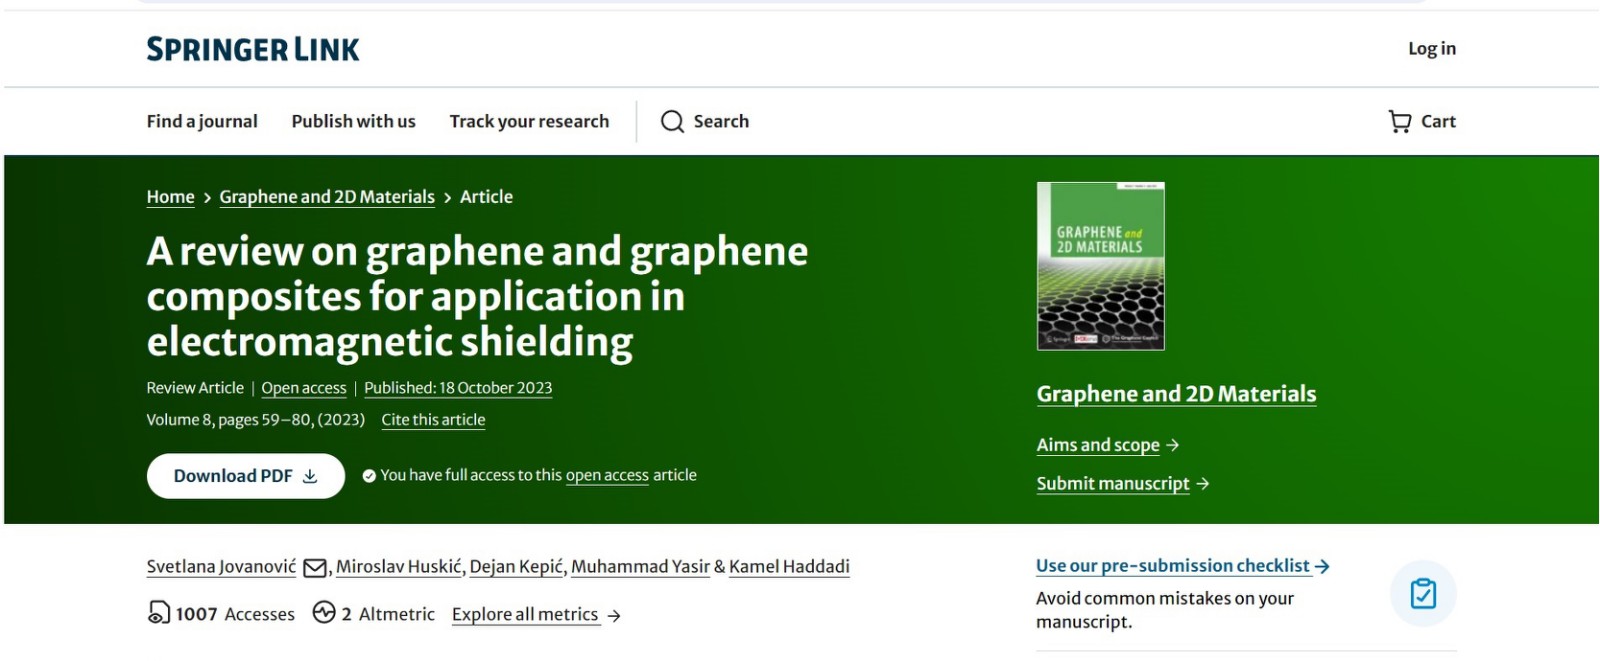 A review on graphene and graphene composites for application in electromagnetic shielding